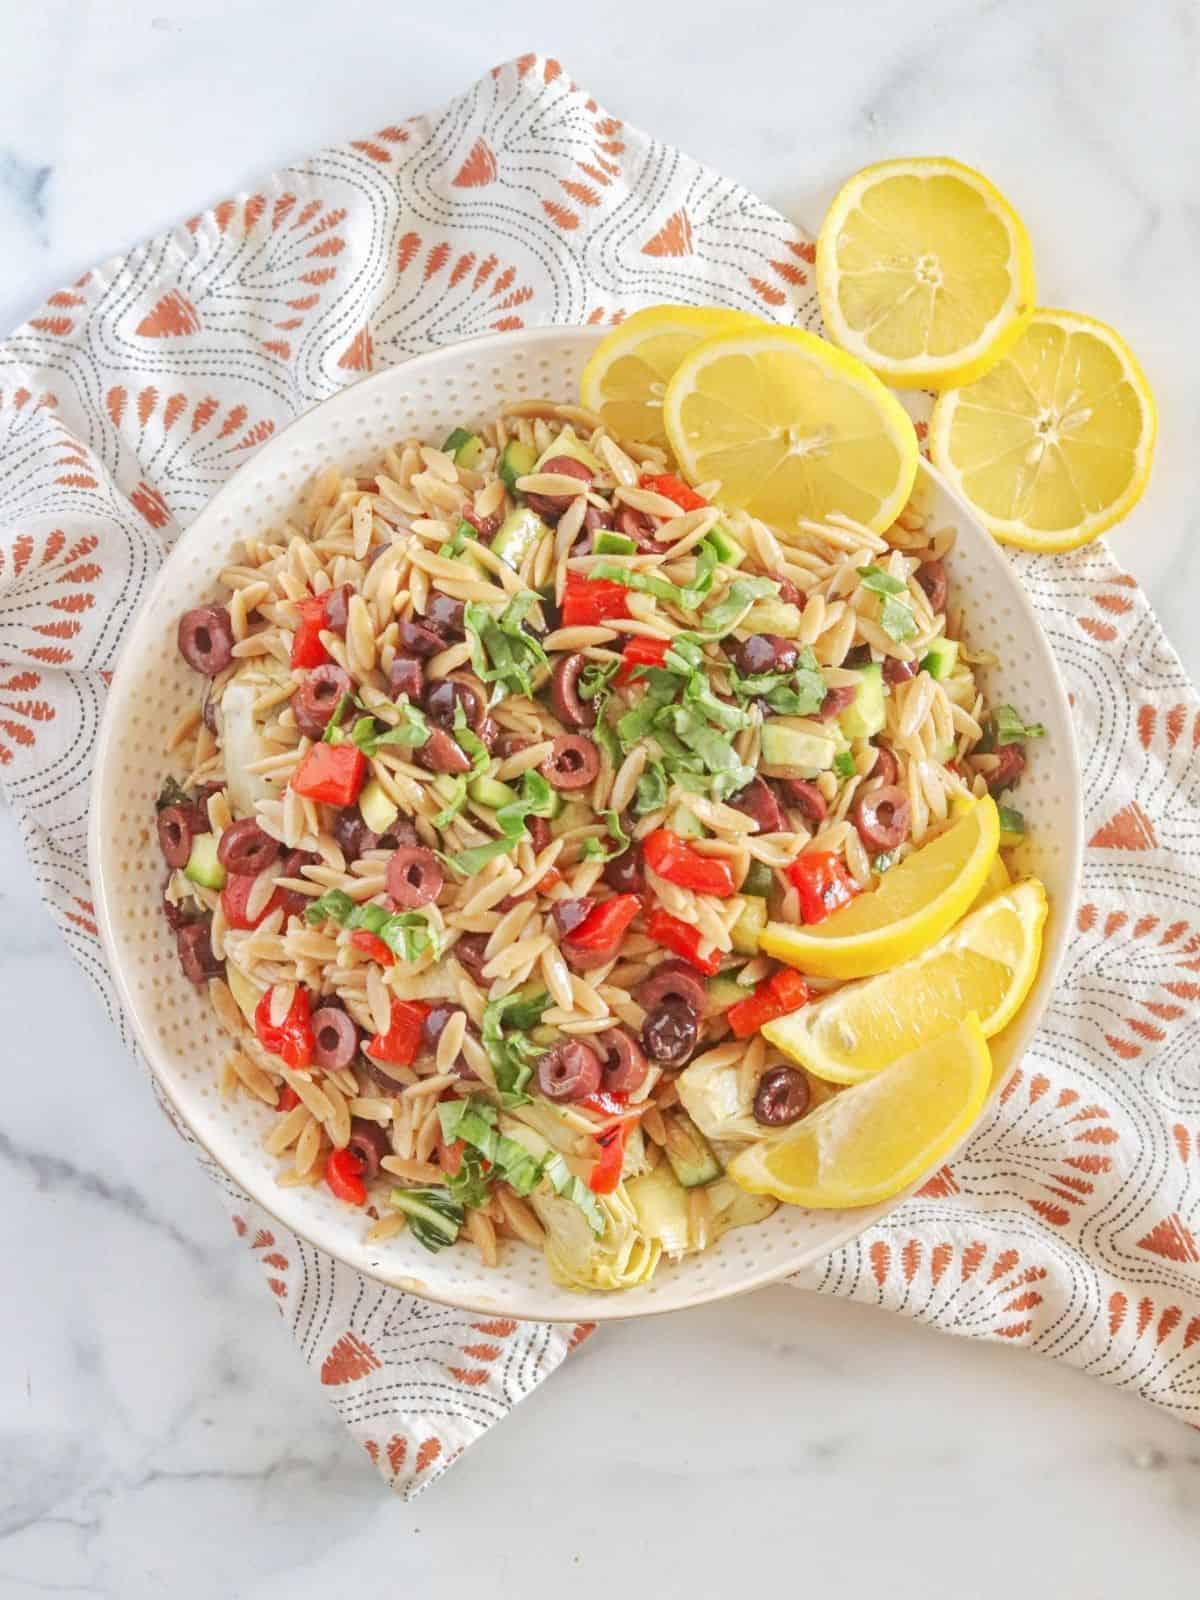 Mixed pasta with vegetables